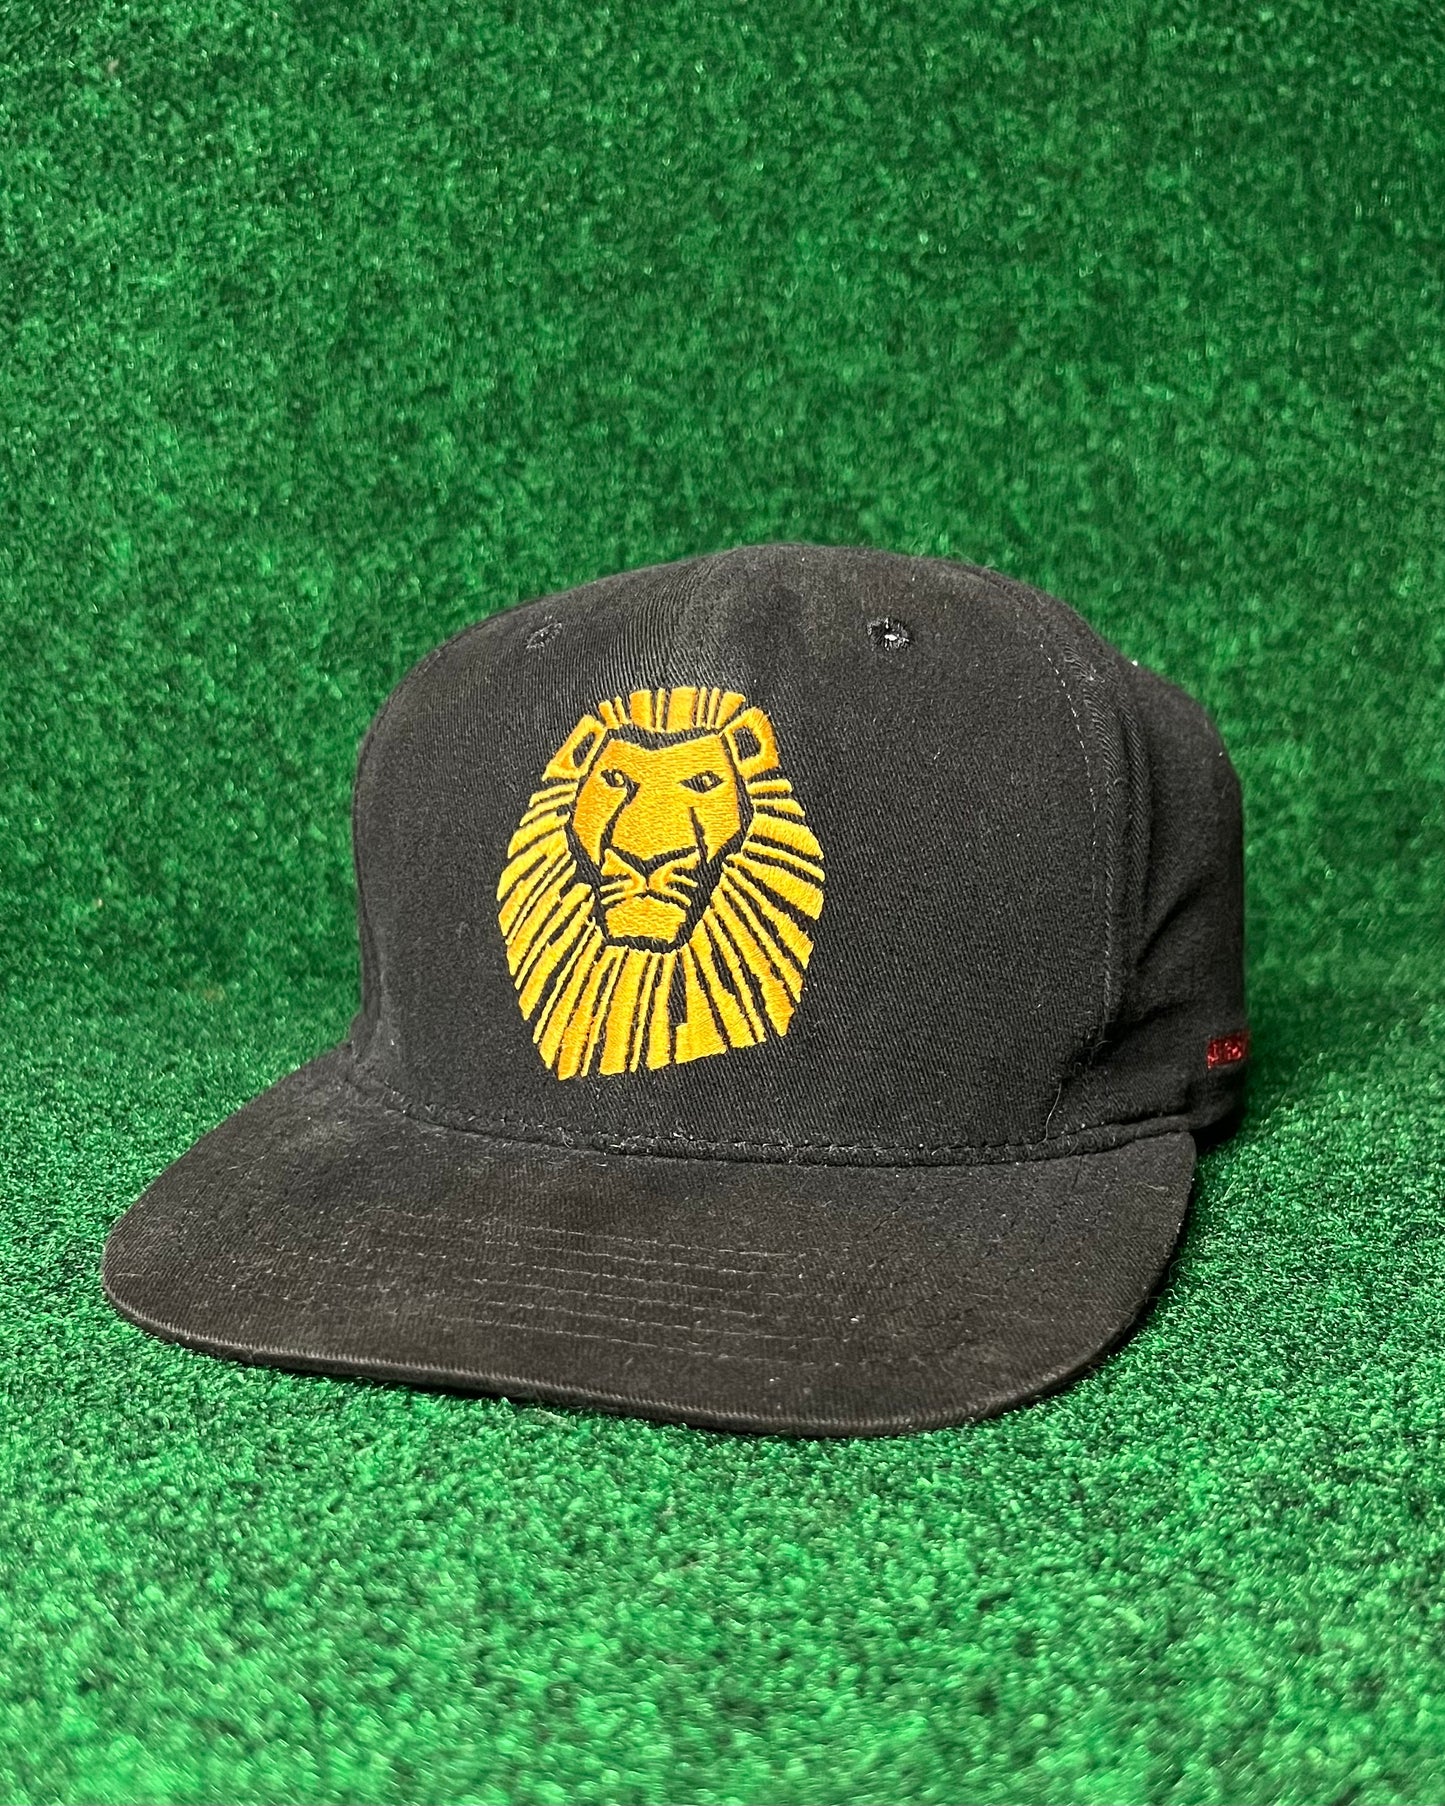 1997 The Lion King: World Premiere Broadway Musical Hat